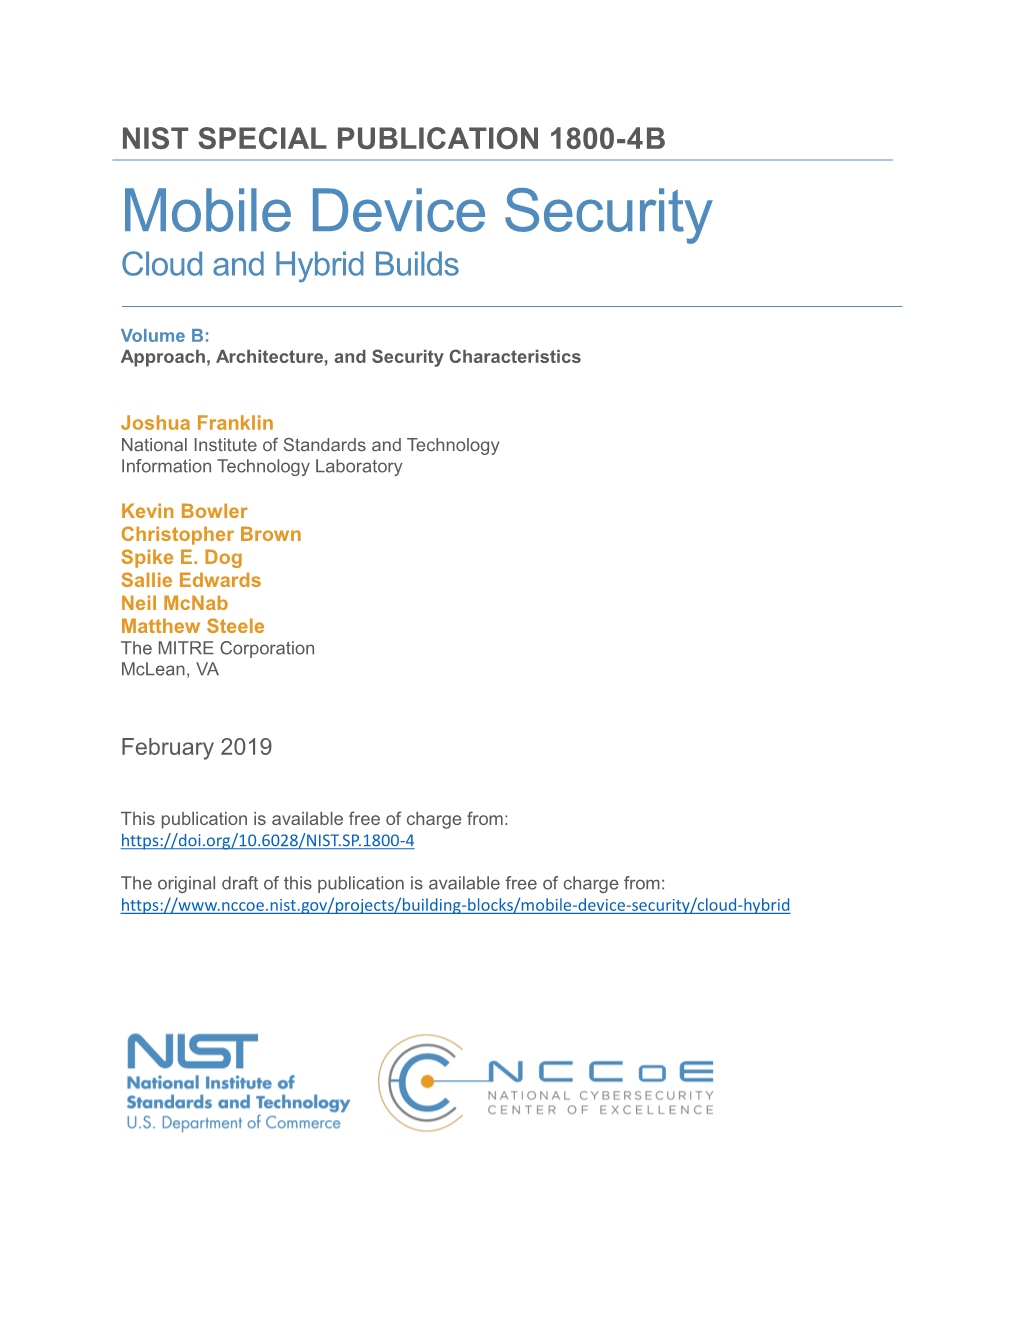 Mobile Device Security: Cloud and Hybrid Builds